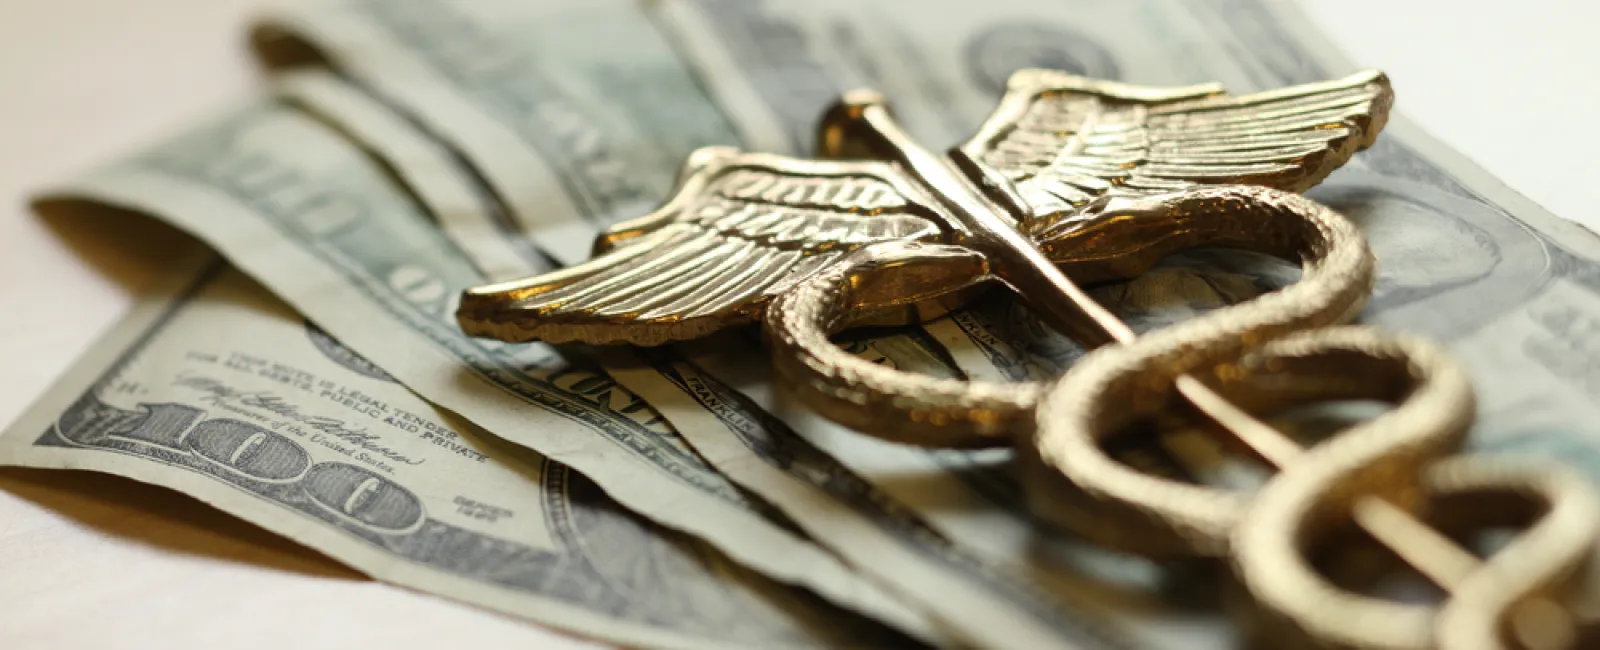 Multiple HIPAA Violations Leads to a $2.5 Million Civil Monetary Penalty